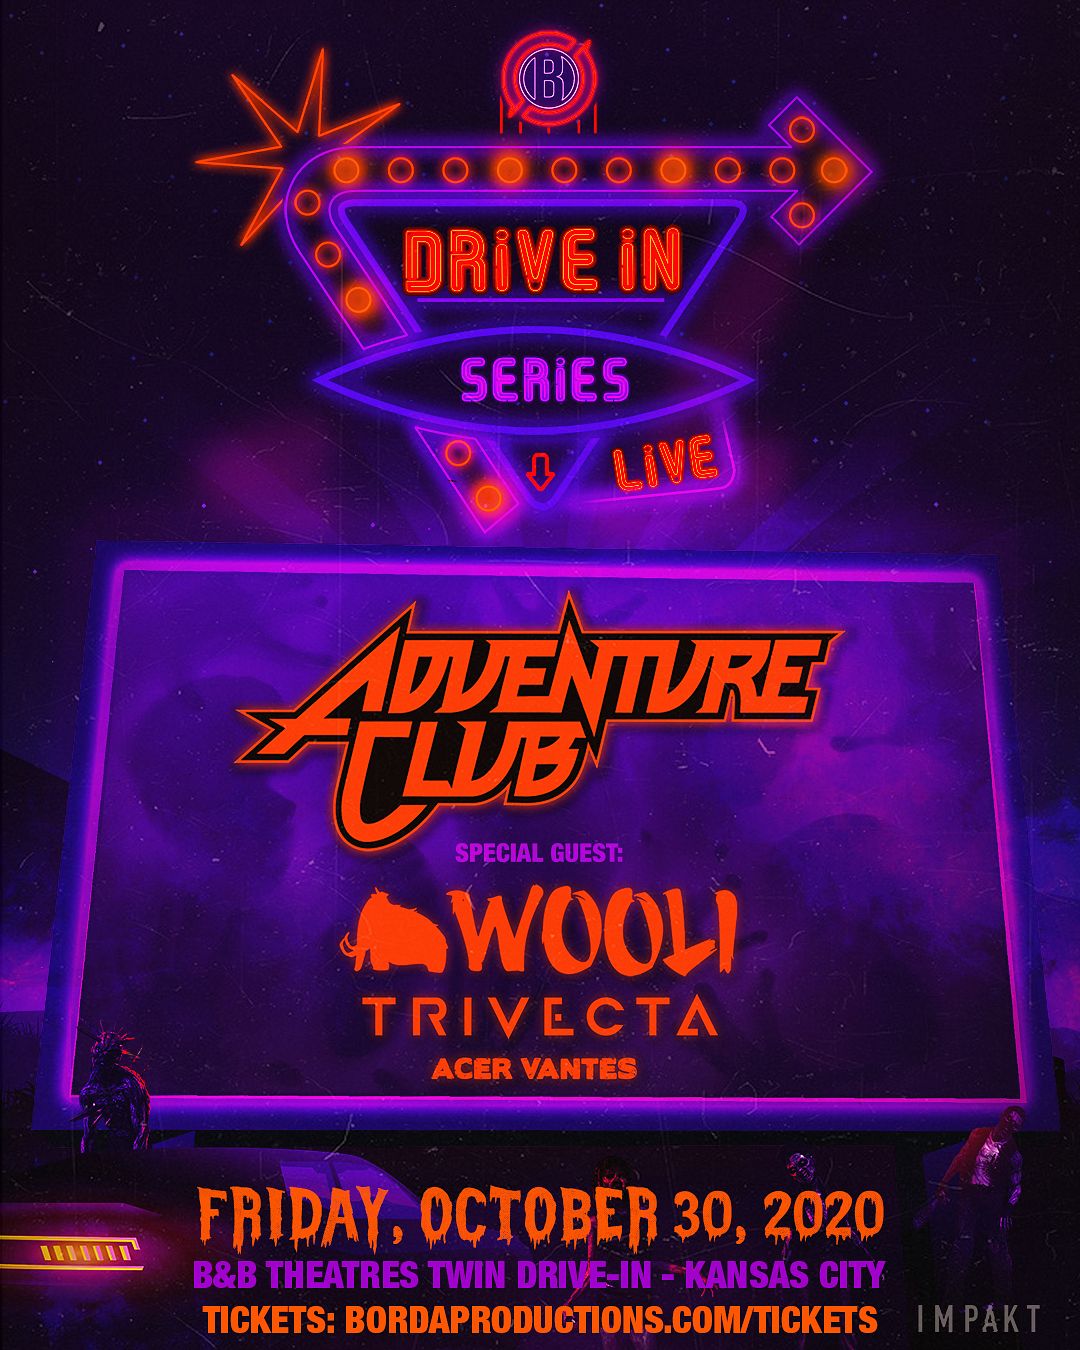 Borda DriveIn Series ft. Adventure Club Tickets at B&B Theaters Twin DriveIn in Independence